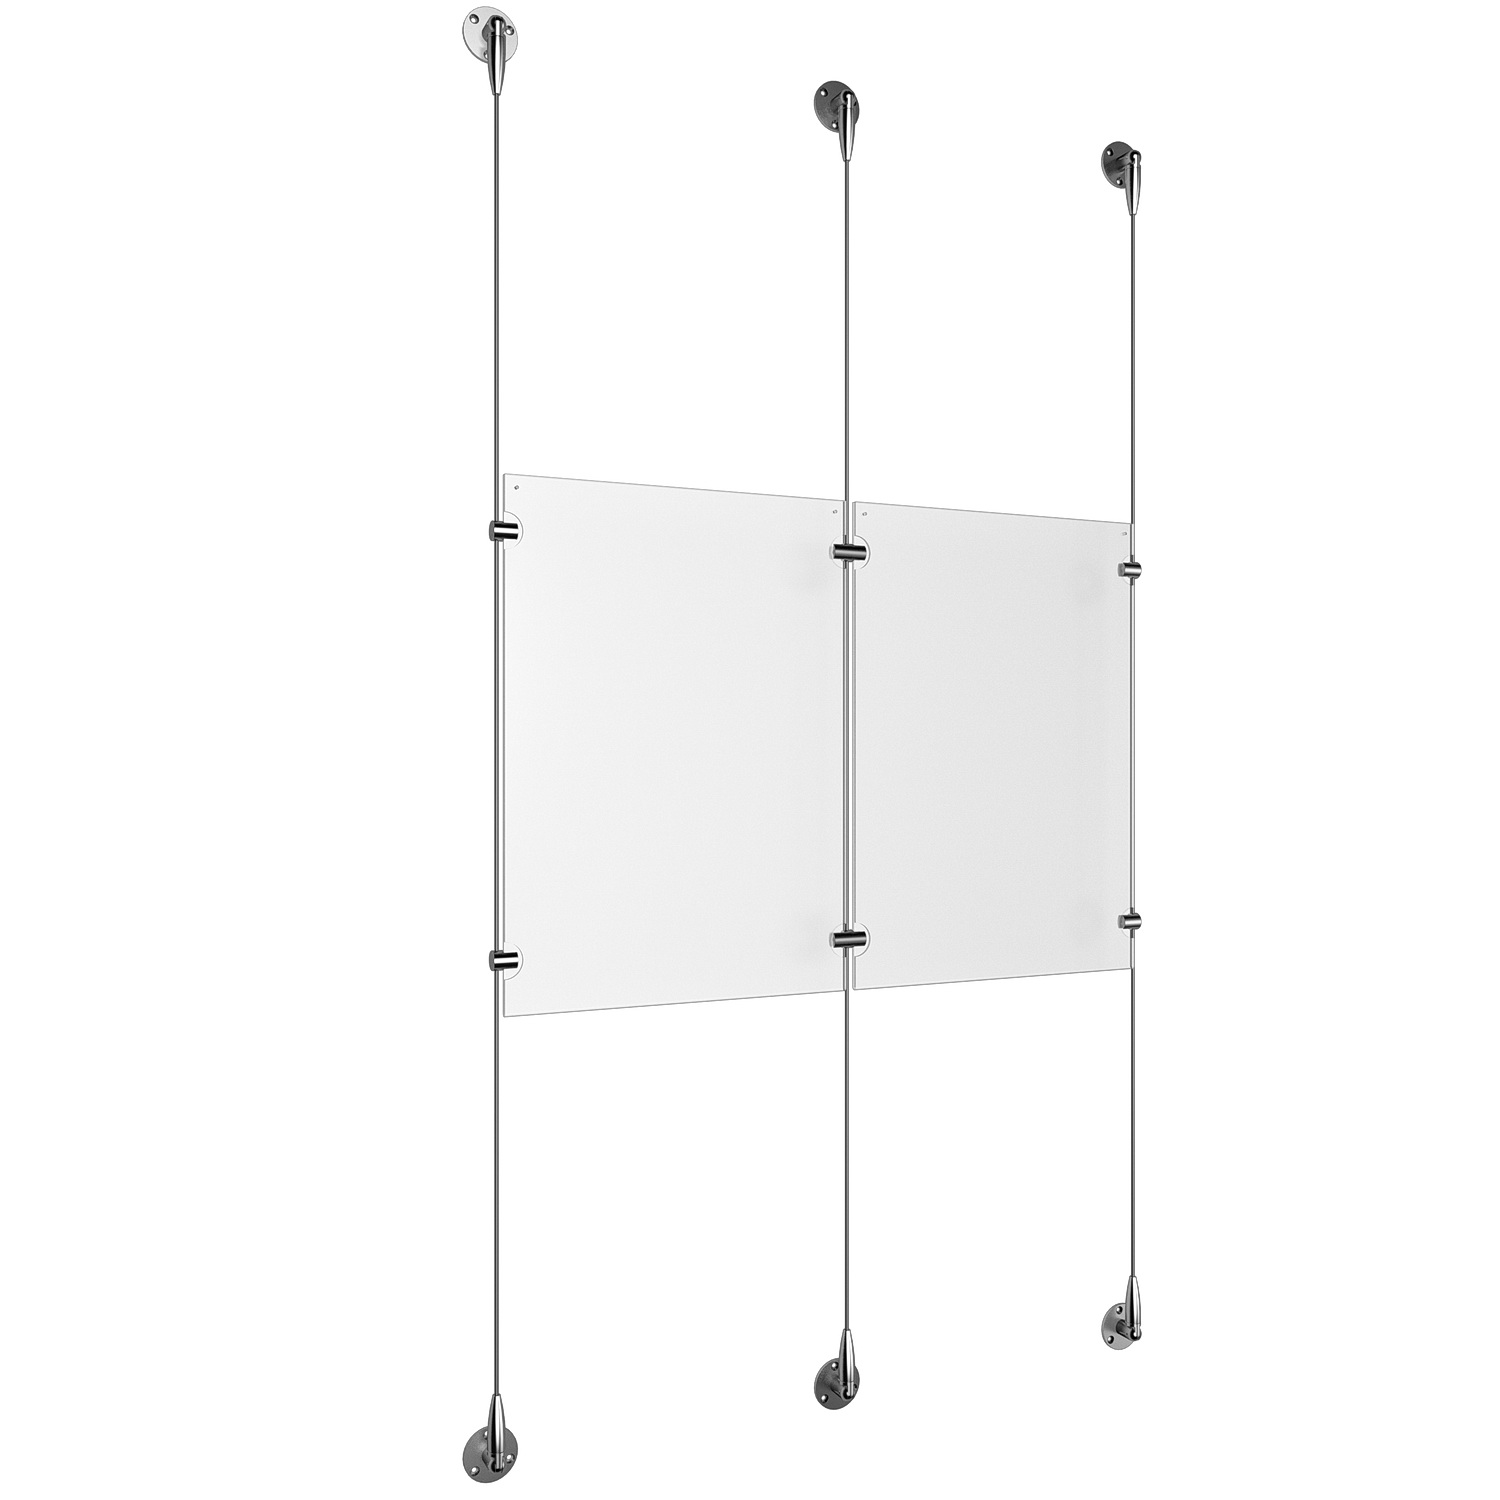 (2) 11'' Width x 17'' Height Clear Acrylic Frame & (3) Stainless Steel Satin Brushed Adjustable Angle Signature 1/8'' Cable Systems with (4) Single-Sided Panel Grippers (2) Double-Sided Panel Grippers